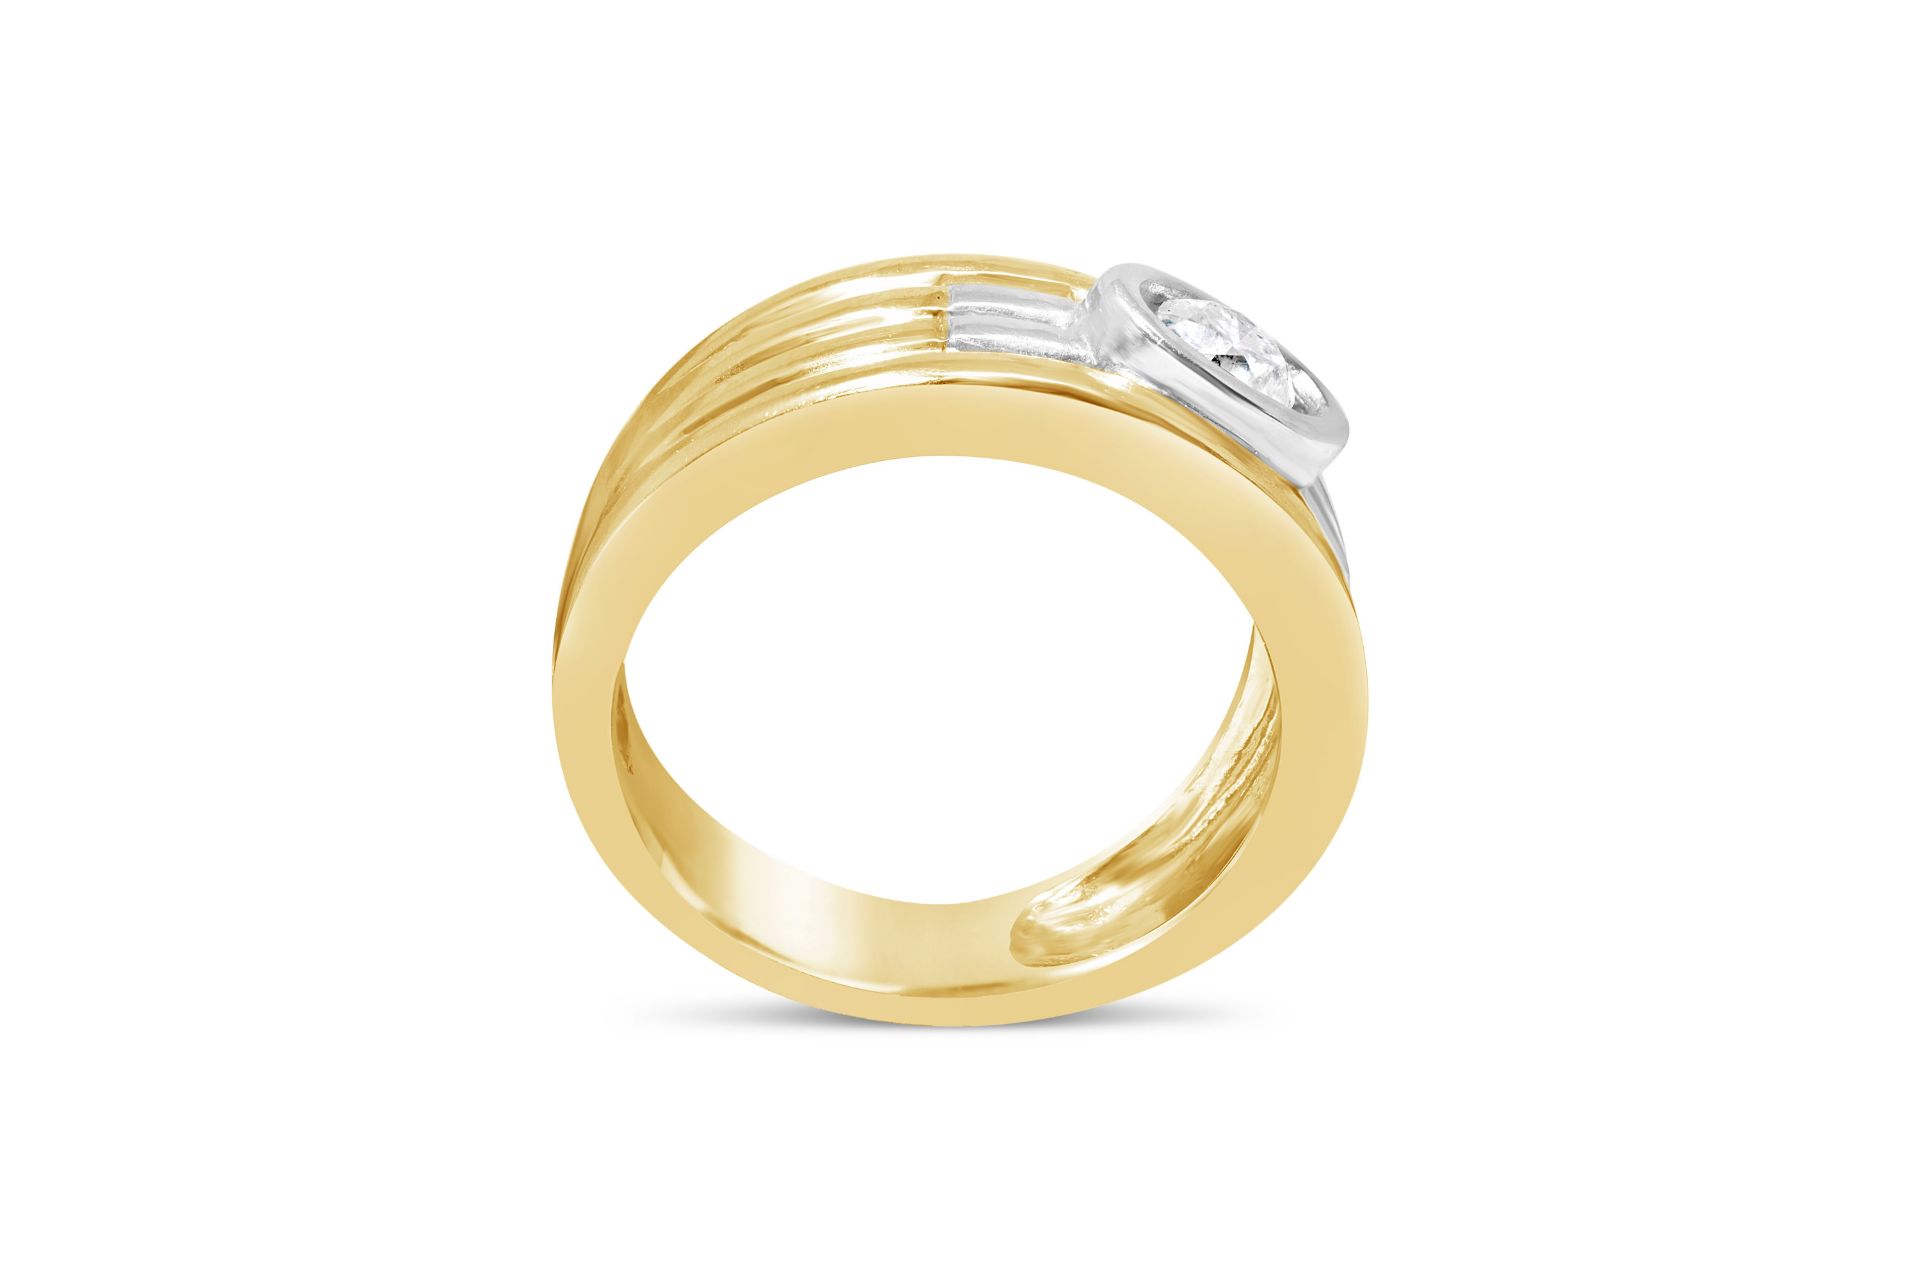 Wide Band Diamond Ring, 9ct Yellow Gold, RRP £2,299 Weight 5.38g, Diamond Weight 0.34ct, Colour H, - Image 3 of 3